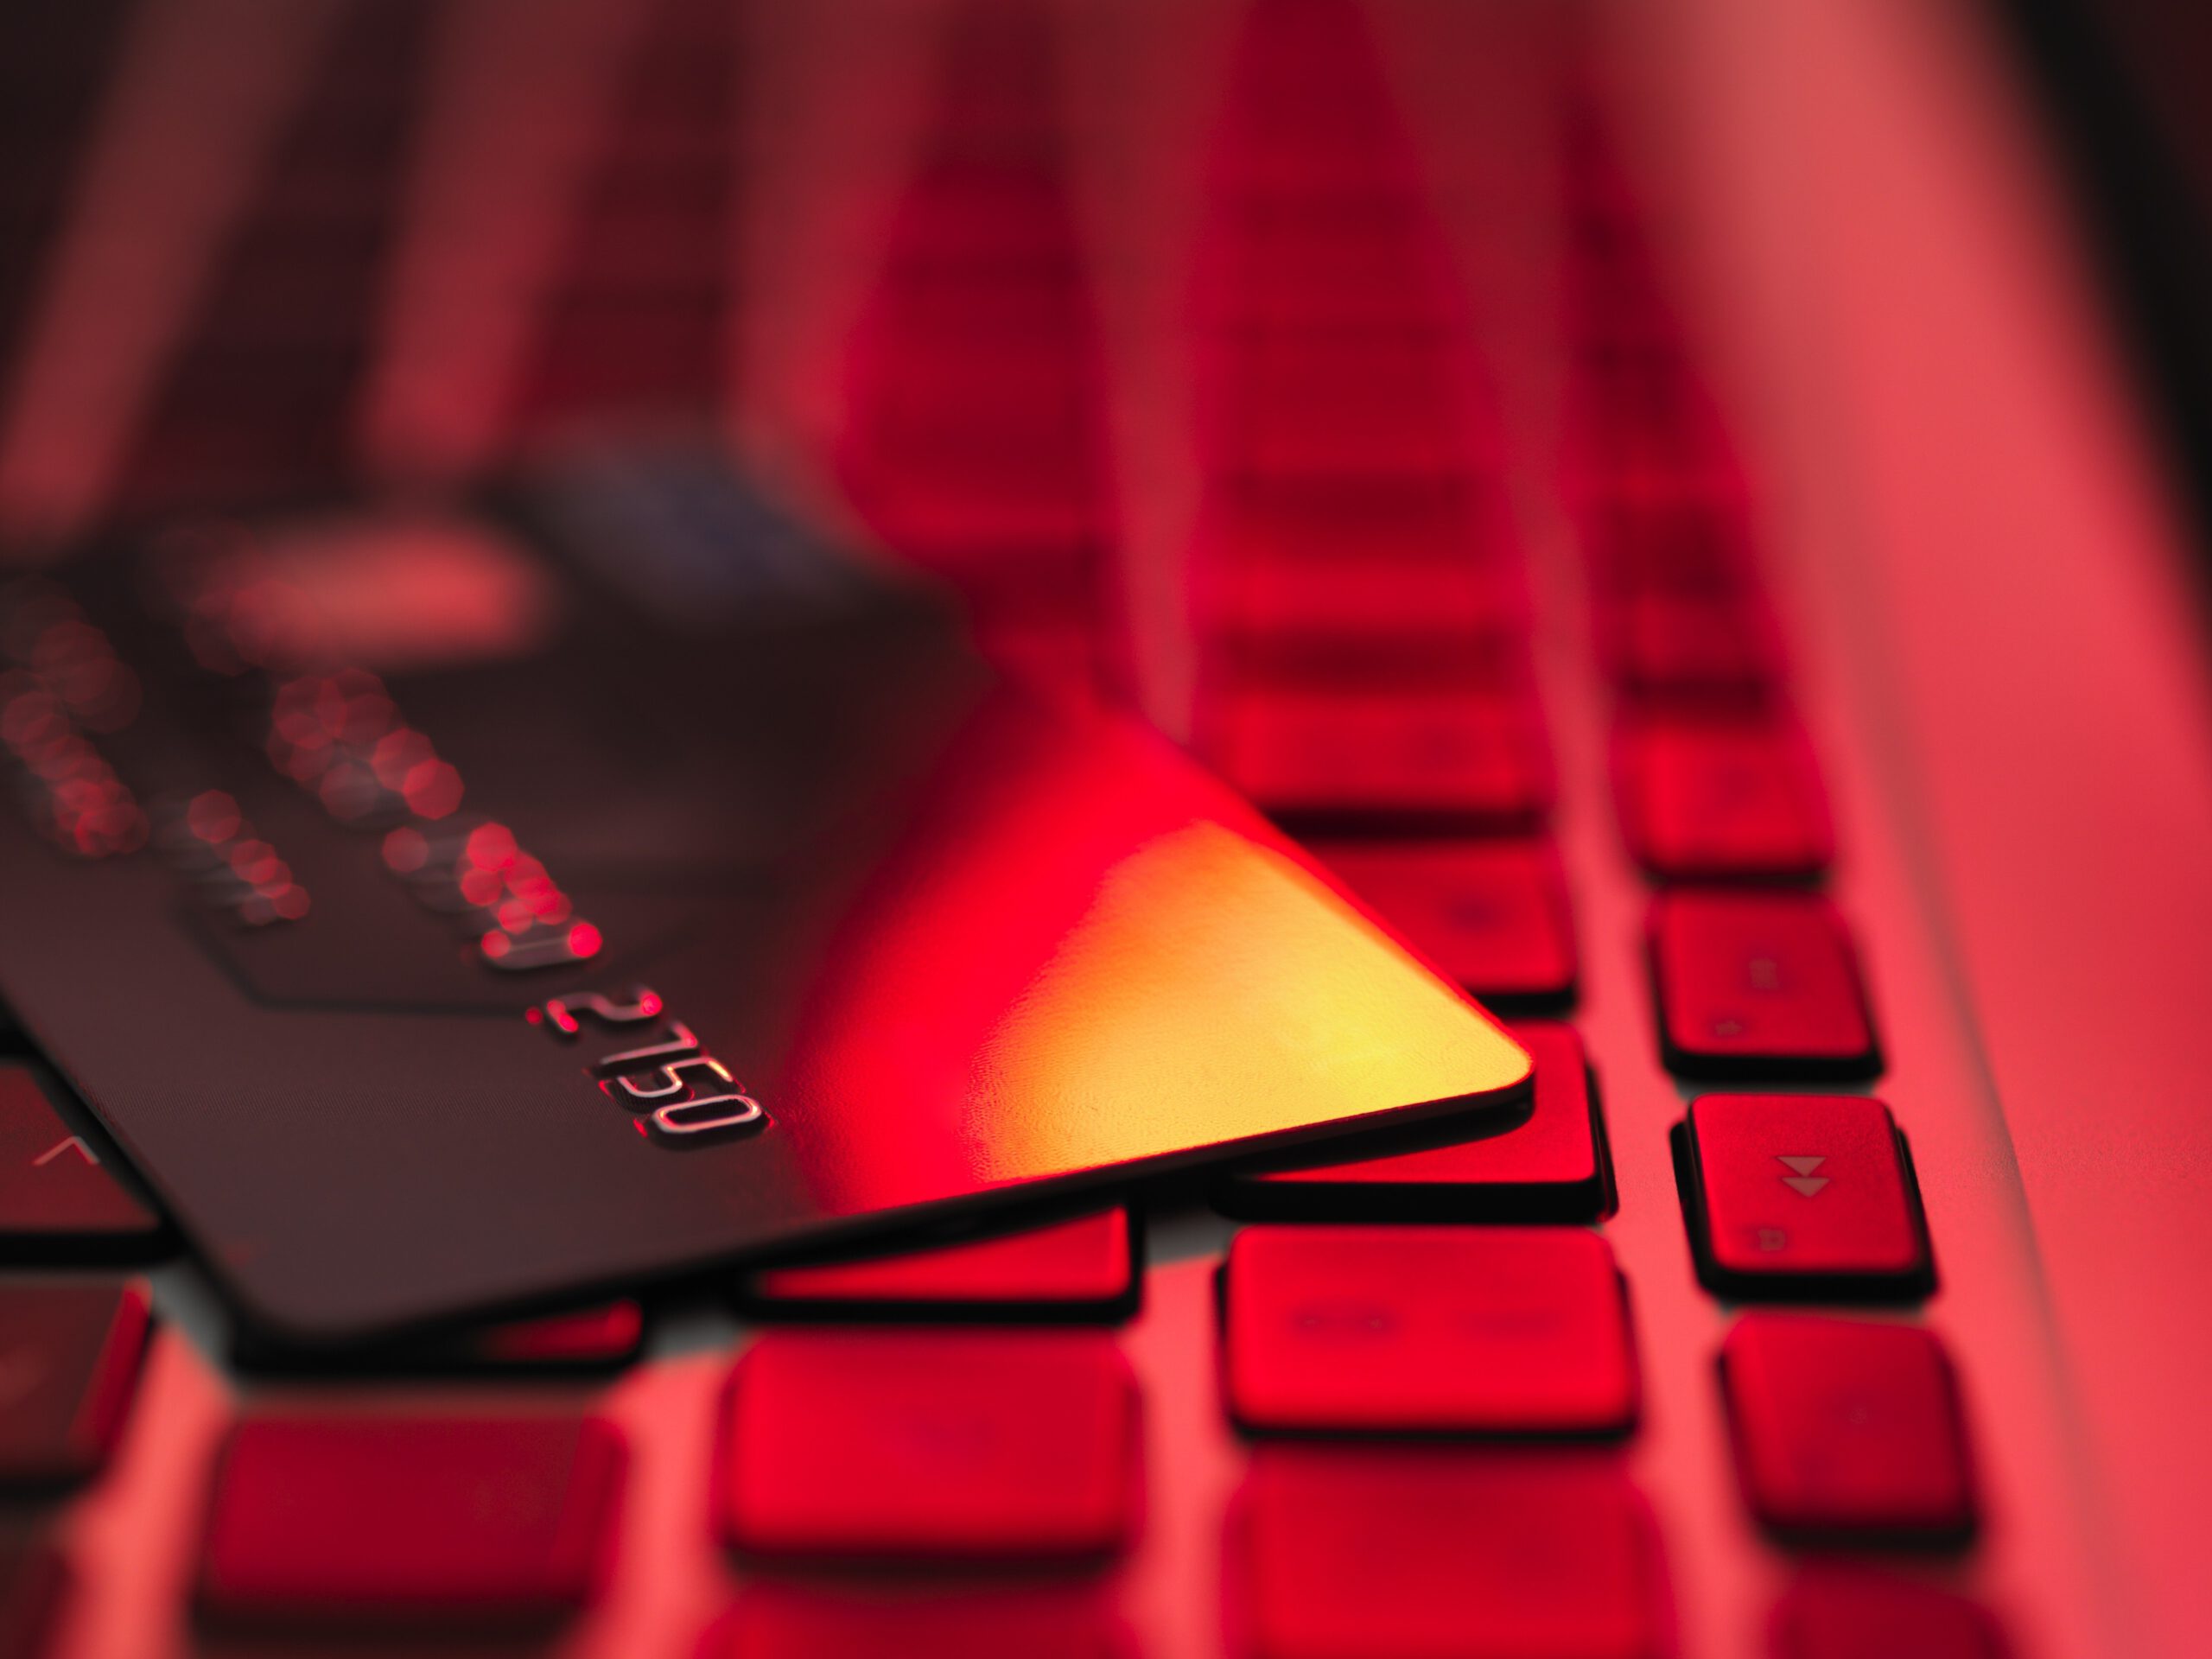 A credit card on a laptop under intense red lighting. 